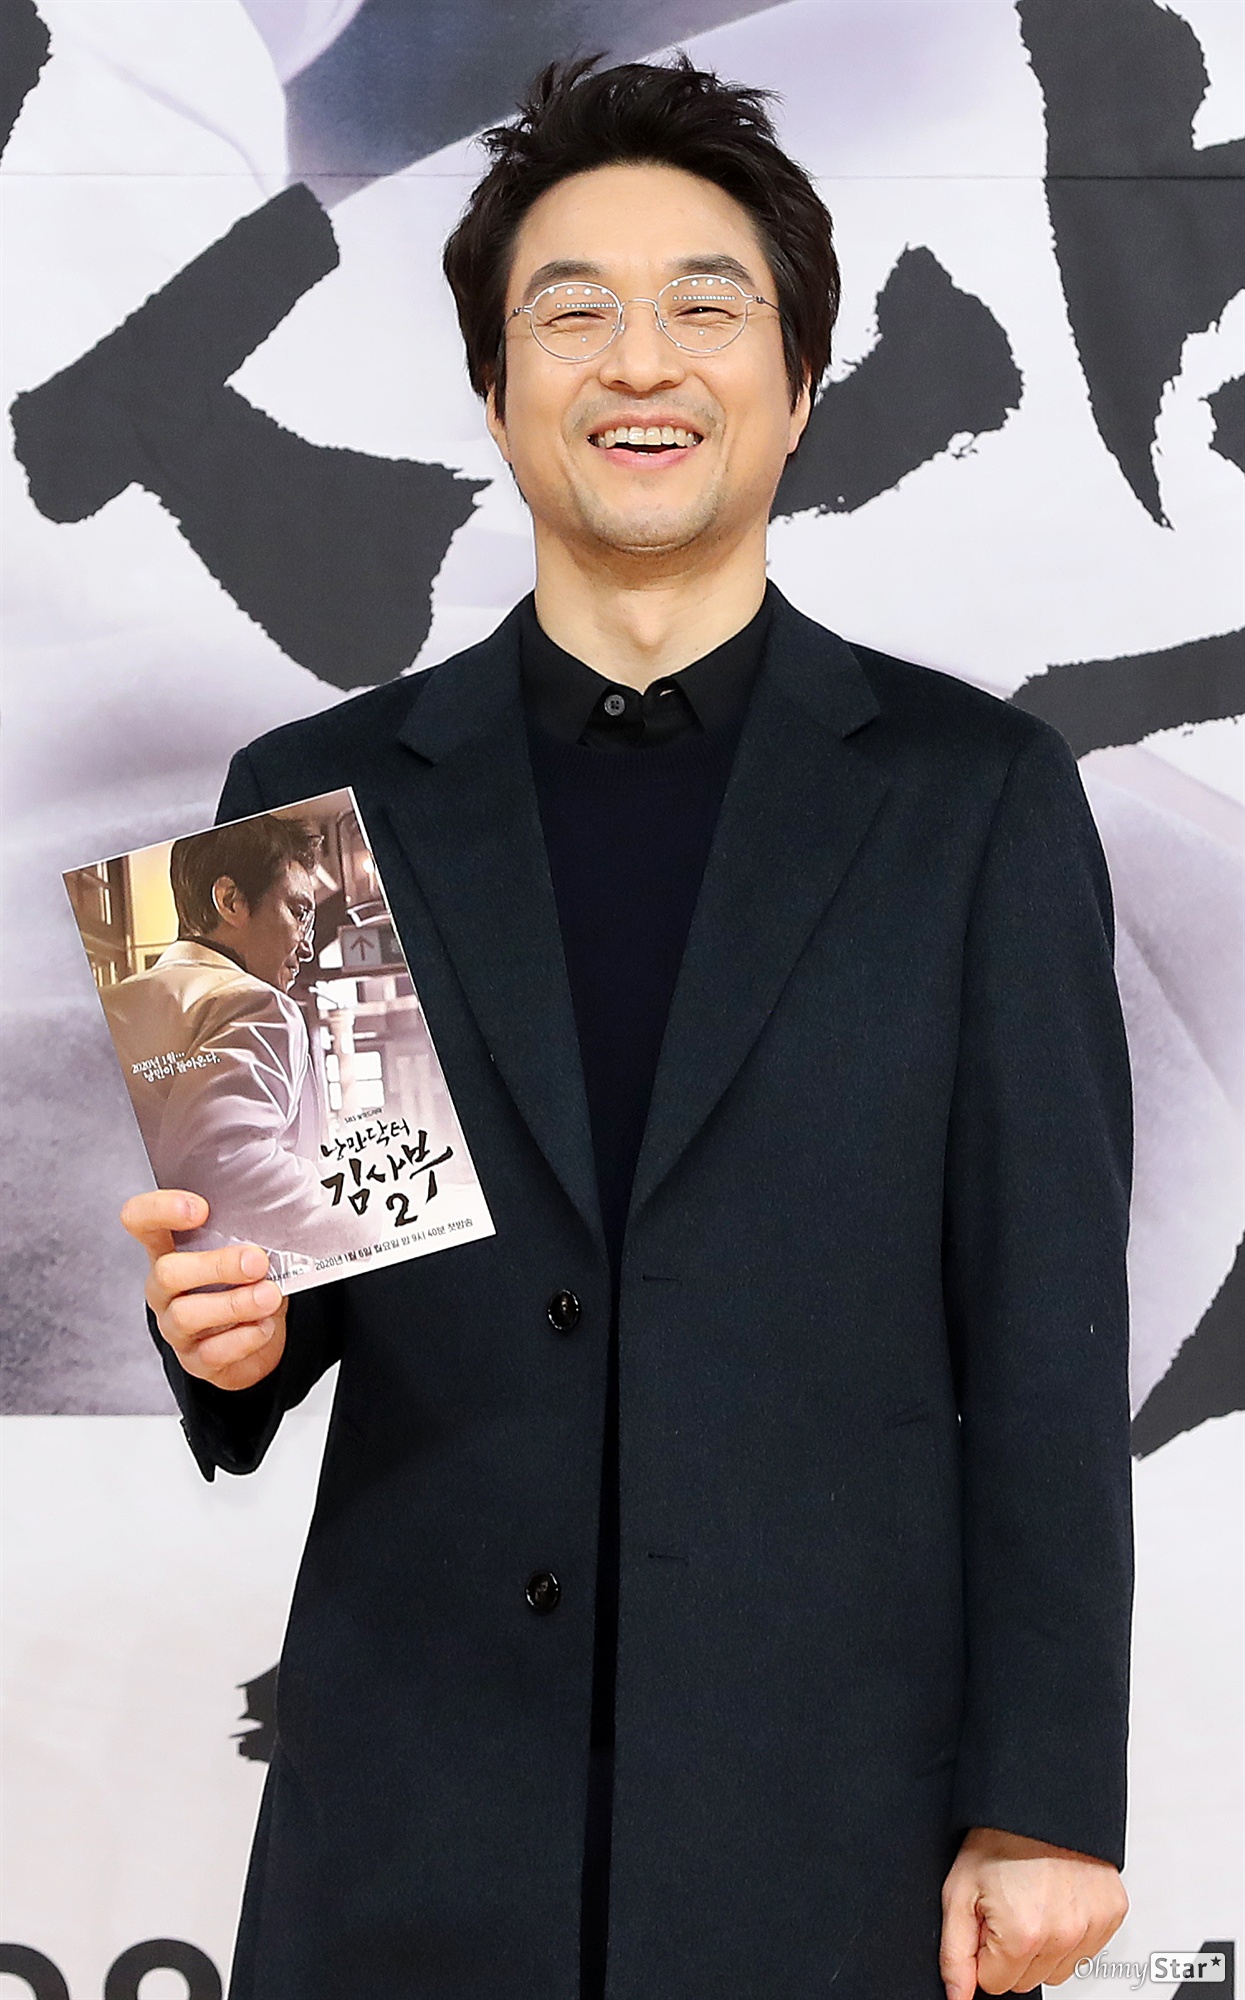 Romantic Doctor Kim Sabu will return in three years. At the time of the season 1, it received a high audience rating of 27.6% and received great love from viewers.The second season of Romantic Doctor Kim Sabu features a new harmony: Kang Eun-kyung, director Yoo In-sik and Han Suk-kyu Actor reunited after season 1.Actor Jin Kyung, Im Won Hee, Kim Min Jae, and Yun Na-mae also became members of the old stone wall this season after the previous season.On the afternoon of the 6th, Romantic Doctor Kim Sabu 2 production presentation was held at SBS office in Mok-dong, Seoul. <Romantic Doctor Kim Sabu 2> will be broadcasted at 9:40 pm on the 6th.It will be broadcast continuously with 20 minutes pulled from the existing 10 oclock broadcast.If the members of old stone wall hold the identity of the drama firmly, the members of Shin stone wall bring new vitality to the drama.Actor Lee Sung-kyung, Ahn Hyo-seop, Kim Joo-heon, Shin Dong-wook and So Ju-yeon joined the Shin Stone Dam members, especially the main characters Ahn Hyo-seop and Lee Sung-kyung.Seo Woo-jin, played by Ahn Hyo-seop, is a cynical character in everything because he has been through a hard life since he was a child.However, in the operating room, it is a surgical fellow who has excellent ability with tremendous concentration and sensitive handwork.What about their co-work?When asked about this, Ahn Hyo-seop replied, I always get a lot of positive energy from Lee Sung-kyung. Lee Sung-kyung replied, Hyo-seop is a lot of stimulus to me because he studies so much and shows me growing up on the spot.Also, when asked if he had a kissing god, Yoo In-sik replied instead: There is a kissing god as good as season one, I think it will come out soon, he tipped.There were also questions about the strengths of Romantic Doctor Kim Sabu 2 because so many medical dramas were introduced. Han Suk-kyu replied.SBS New Mon-Tue Drama